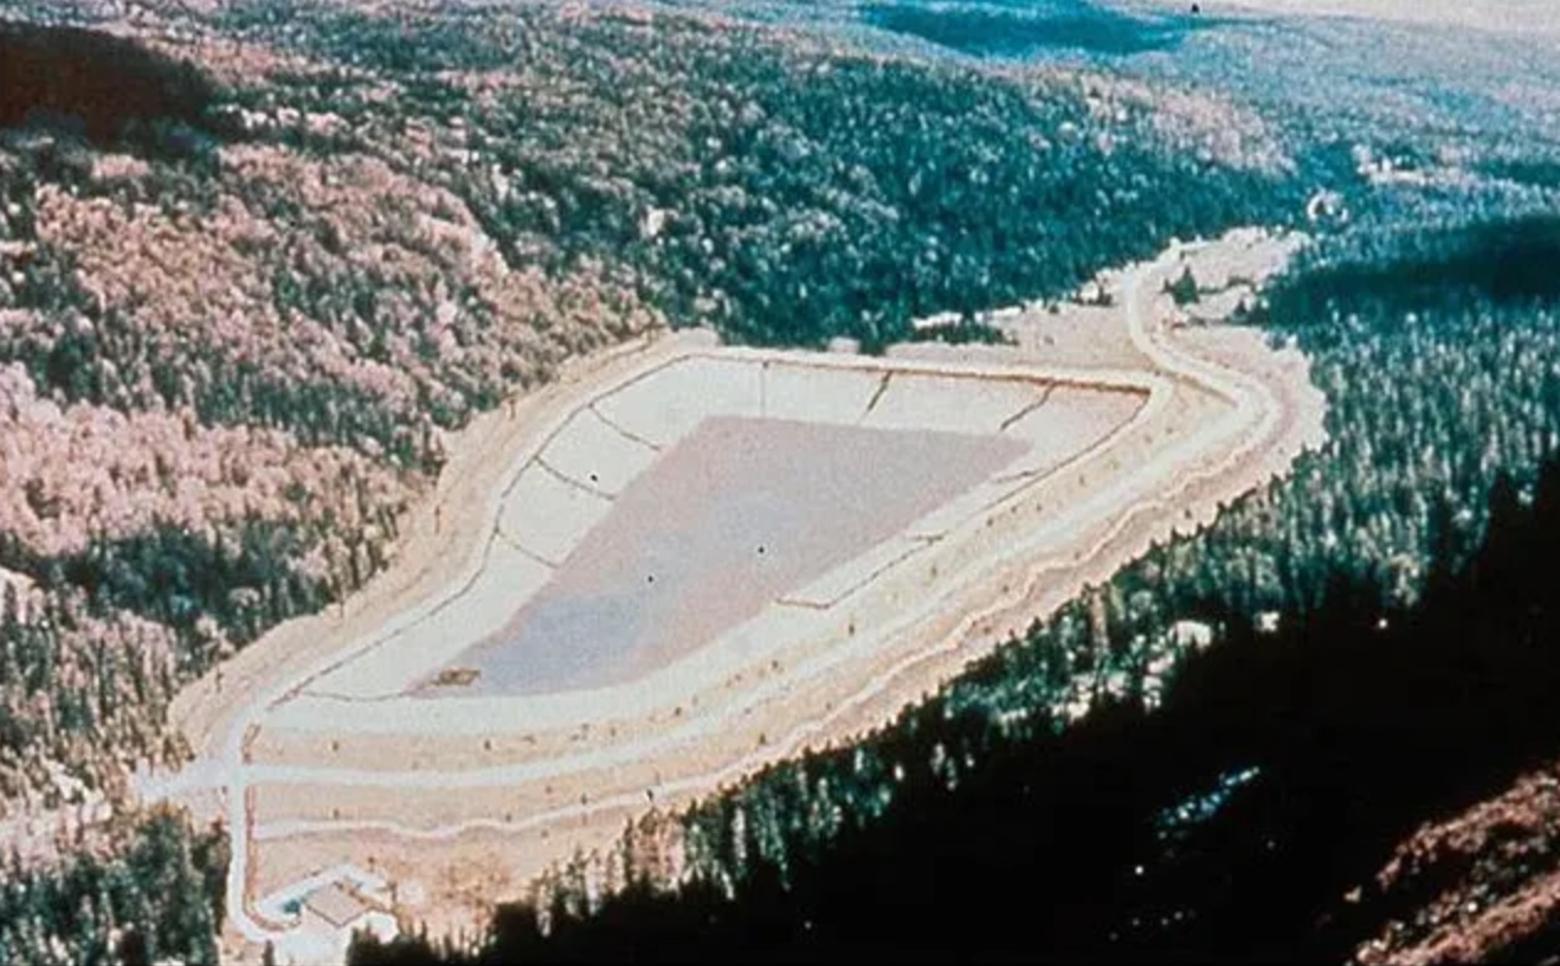 A mining company's illustration of the proposed massive New World tailings pond, more than a football field deep, that would have been built near the northeastern border of Yellowstone and the Absaroka-Beartooth Wilderness. The mining and waste facilities were cited in a drainage that flows into the Yellowstone River system. The fight to stop it became one of the highest-profile environmental protection battles in US history. 